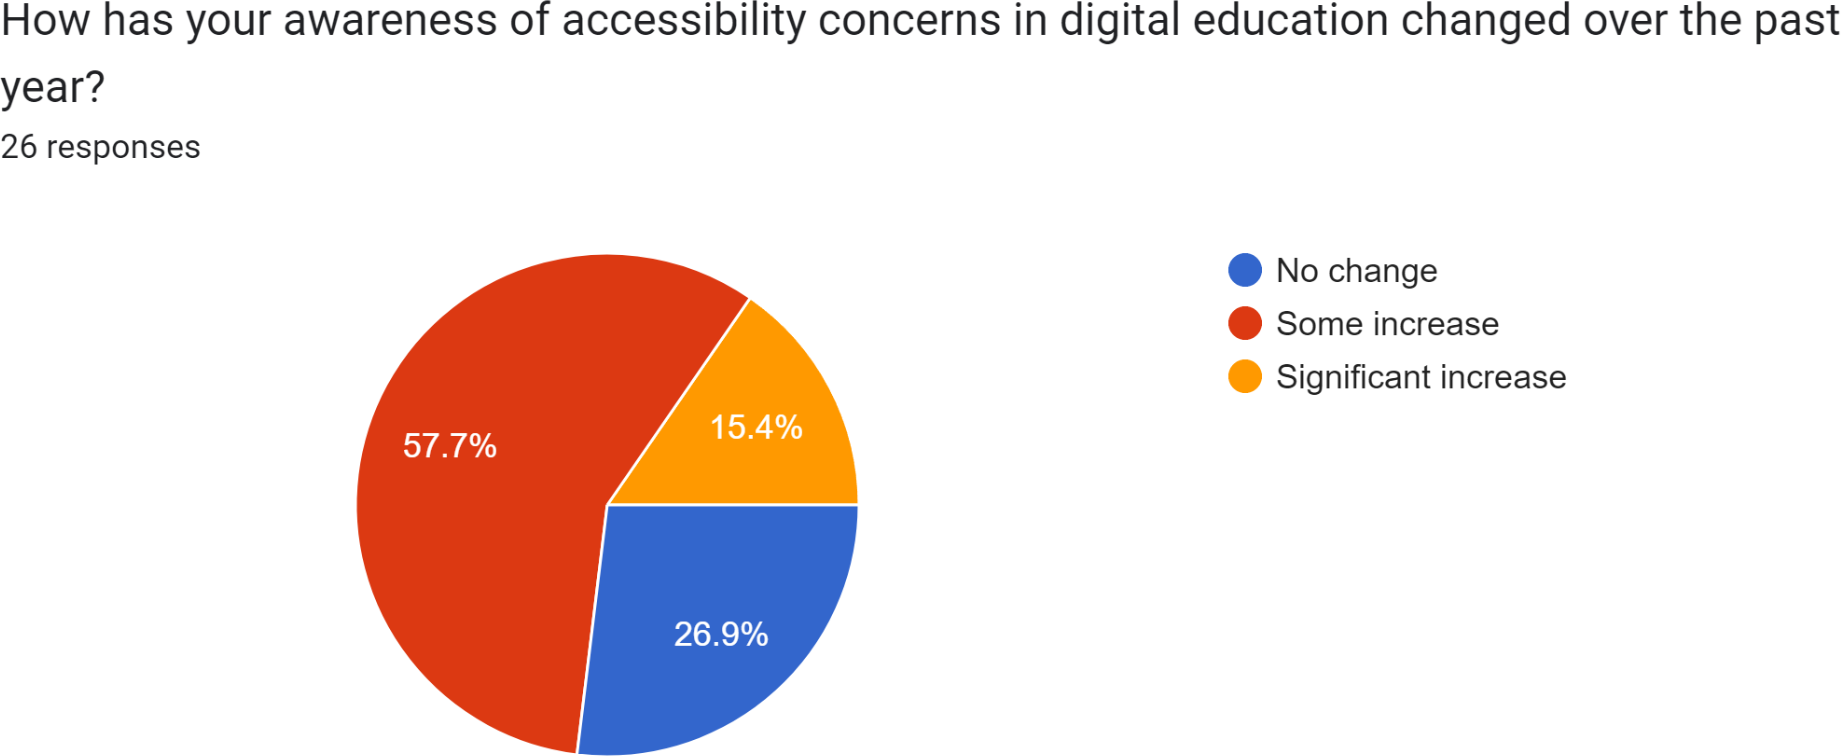 Pie chart showing how awareness of accessibility concerns has changed over the past year: some increase (57.7%), significant increase (15.4%), and no change (26.9%). 